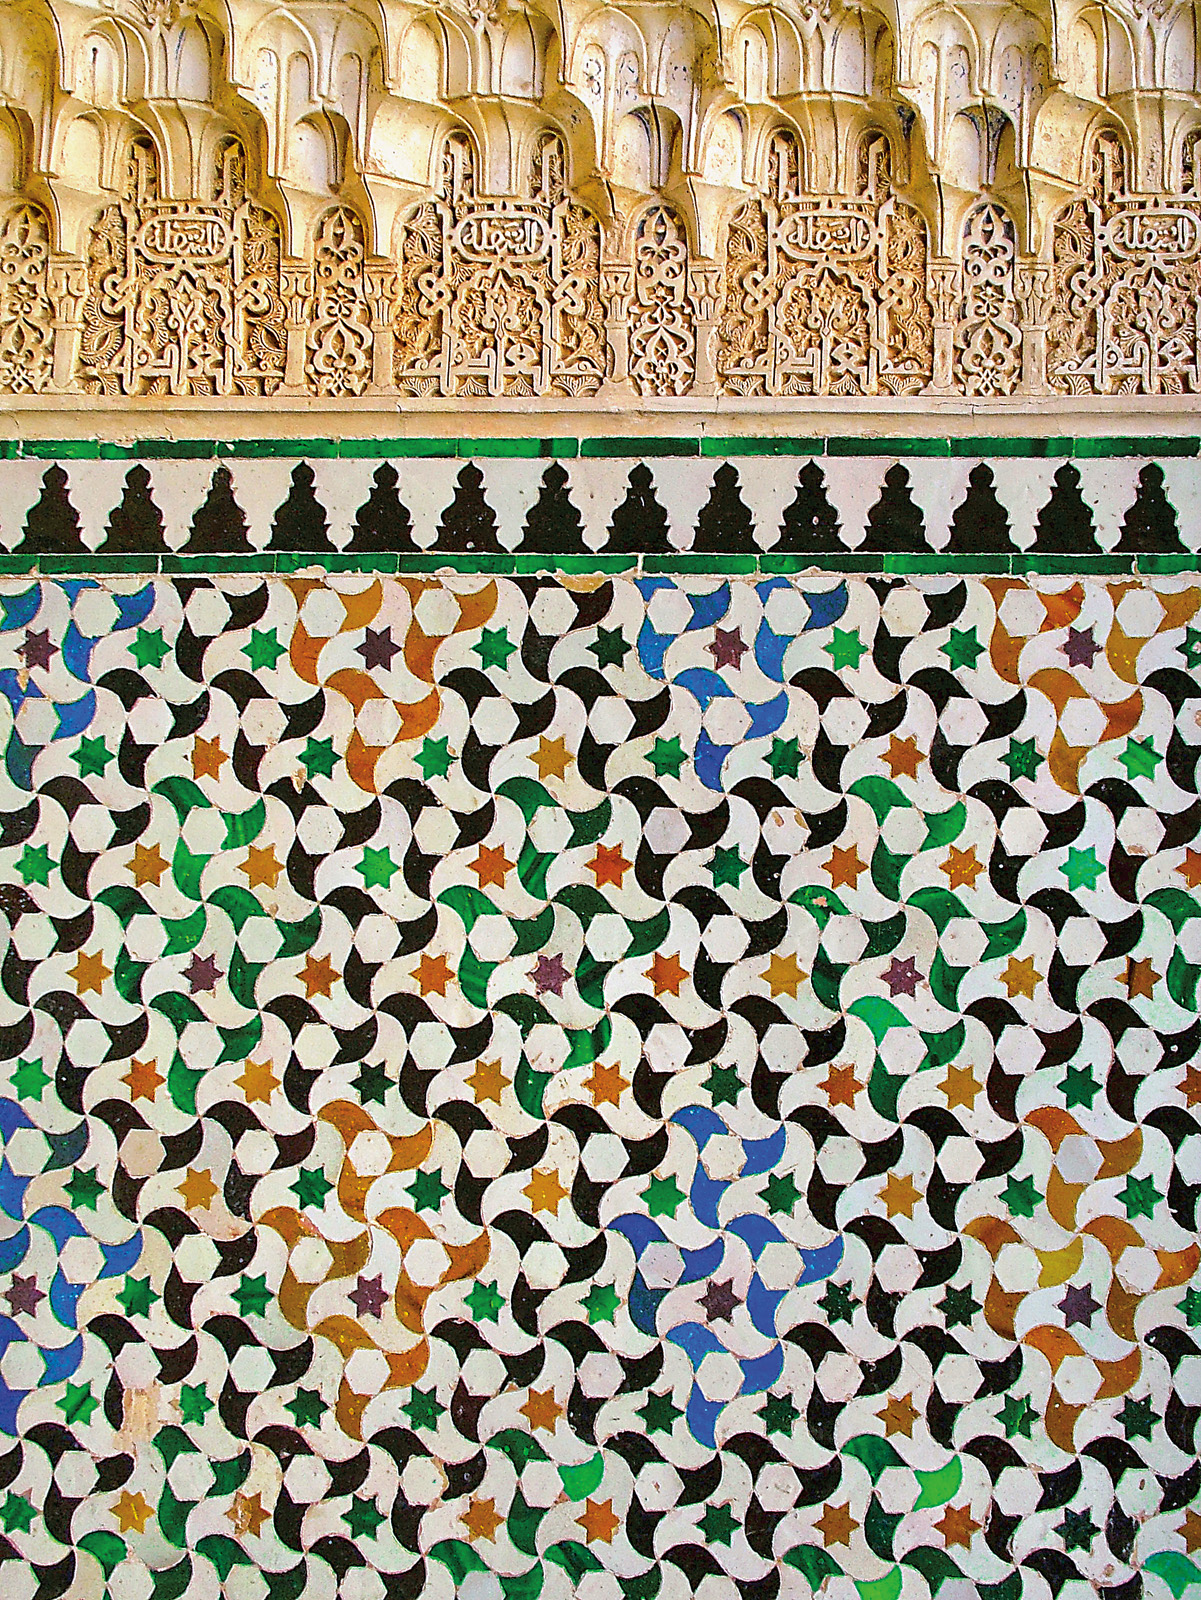 Multicolored tiles seem to twirl through space in this <i>alicatado</i> (cut-tile) pattern produced in the 14th century by Nasrid artisans on a wall of the Court of the Myrtles in the Alhambra palace in Granada, Spain. The Arabic root of the Spanish alicatado is <i>al-qata</i>, &ldquo;the cut.&rdquo; &nbsp;